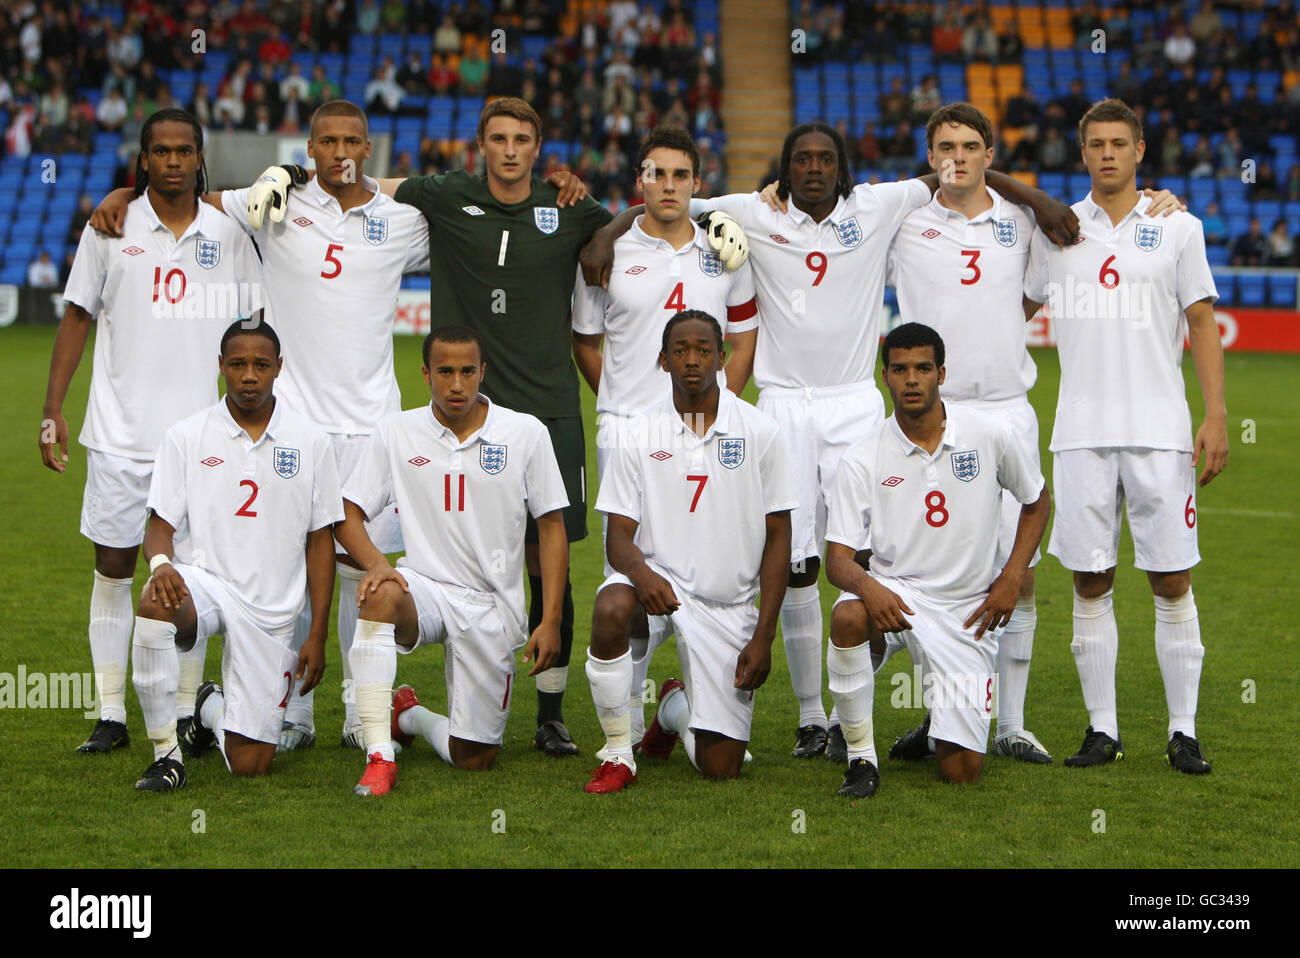 England's U19 (back row left to right) Nathan Delfouneso, Reece Brown, Declan Rudd, Matthew James, Nile Ranger, Scott Malone, Nathan Baker (Front Row) Nathan Clyne, Andros Townsend, Sanchez Watt and Jacob Mellis line up before the Under-19 International Friendly at the ProStar Stadium, Shrewsbury. Stock Photo